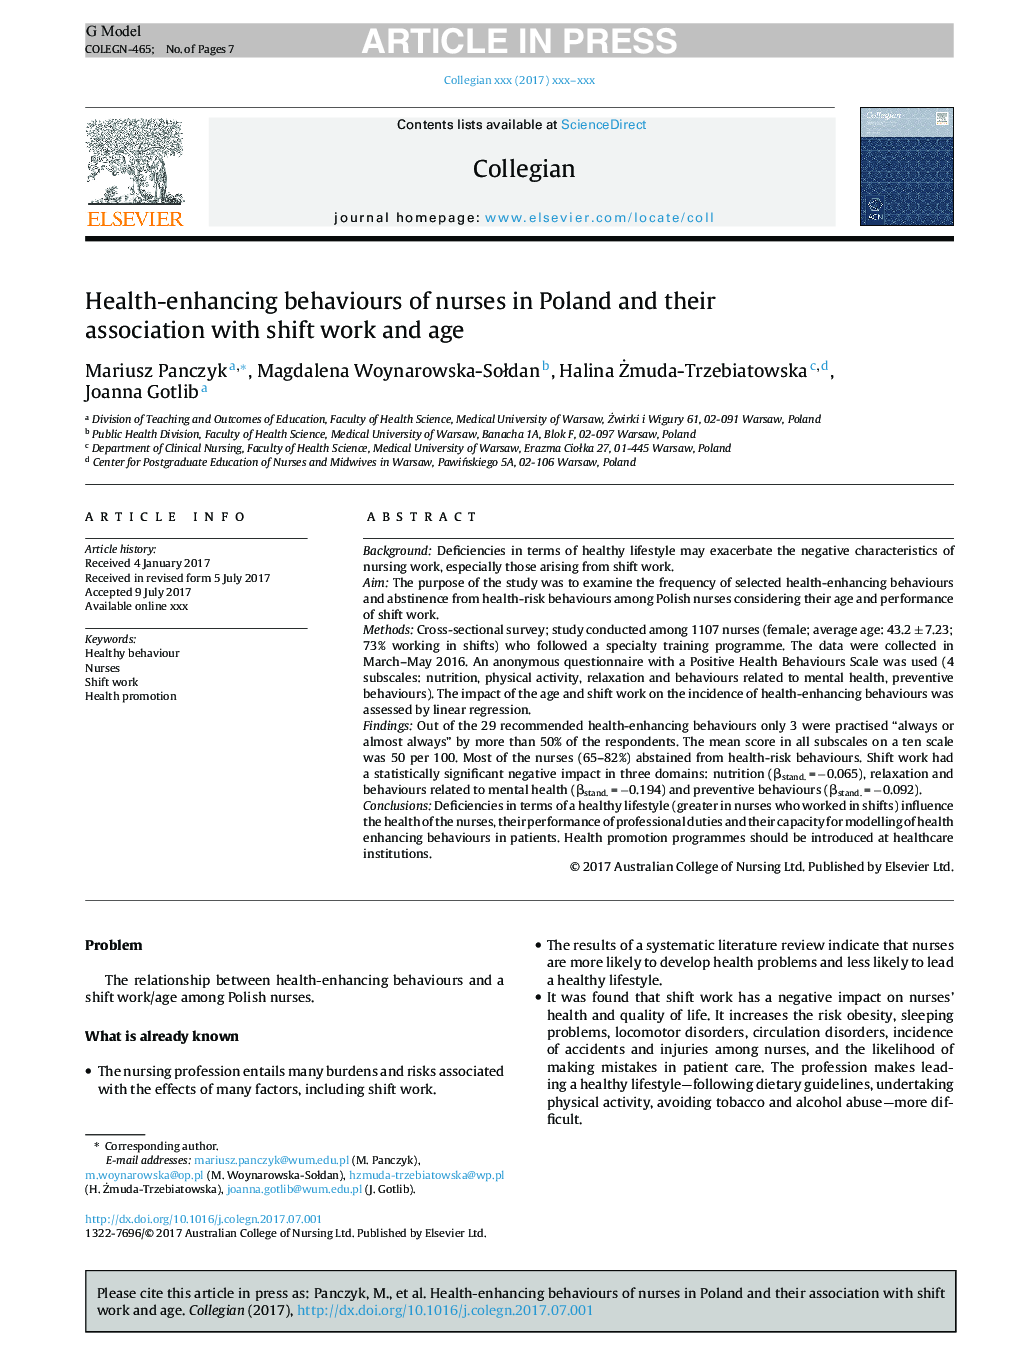 Health-enhancing behaviours of nurses in Poland and their association with shift work and age